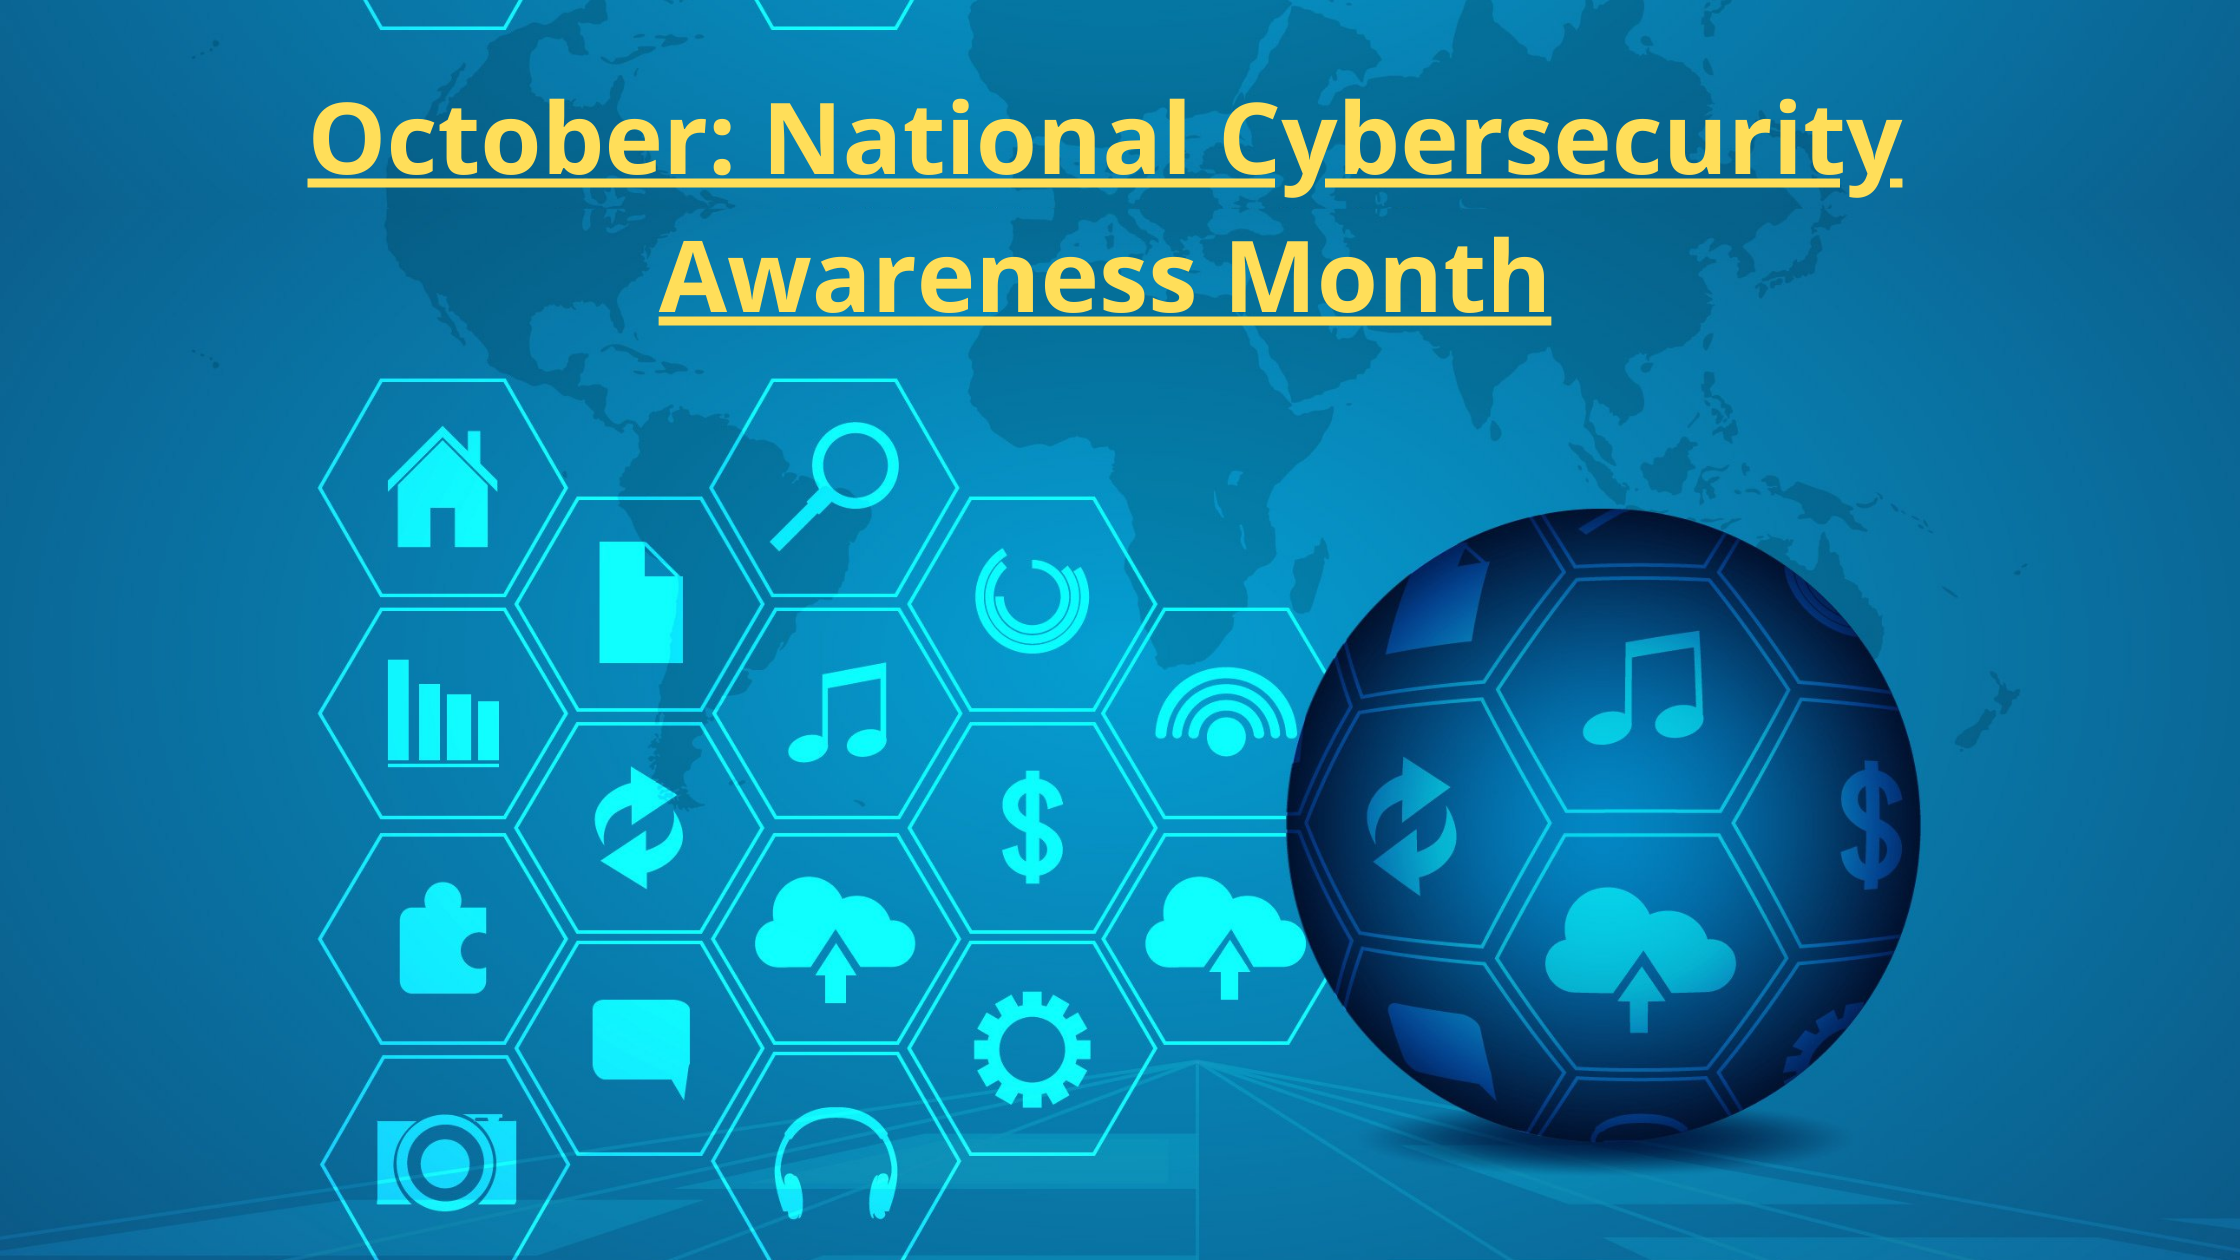 National Cybersecurity Awareness Month What every organization should know about Cyber Risk & IoT Security (3)